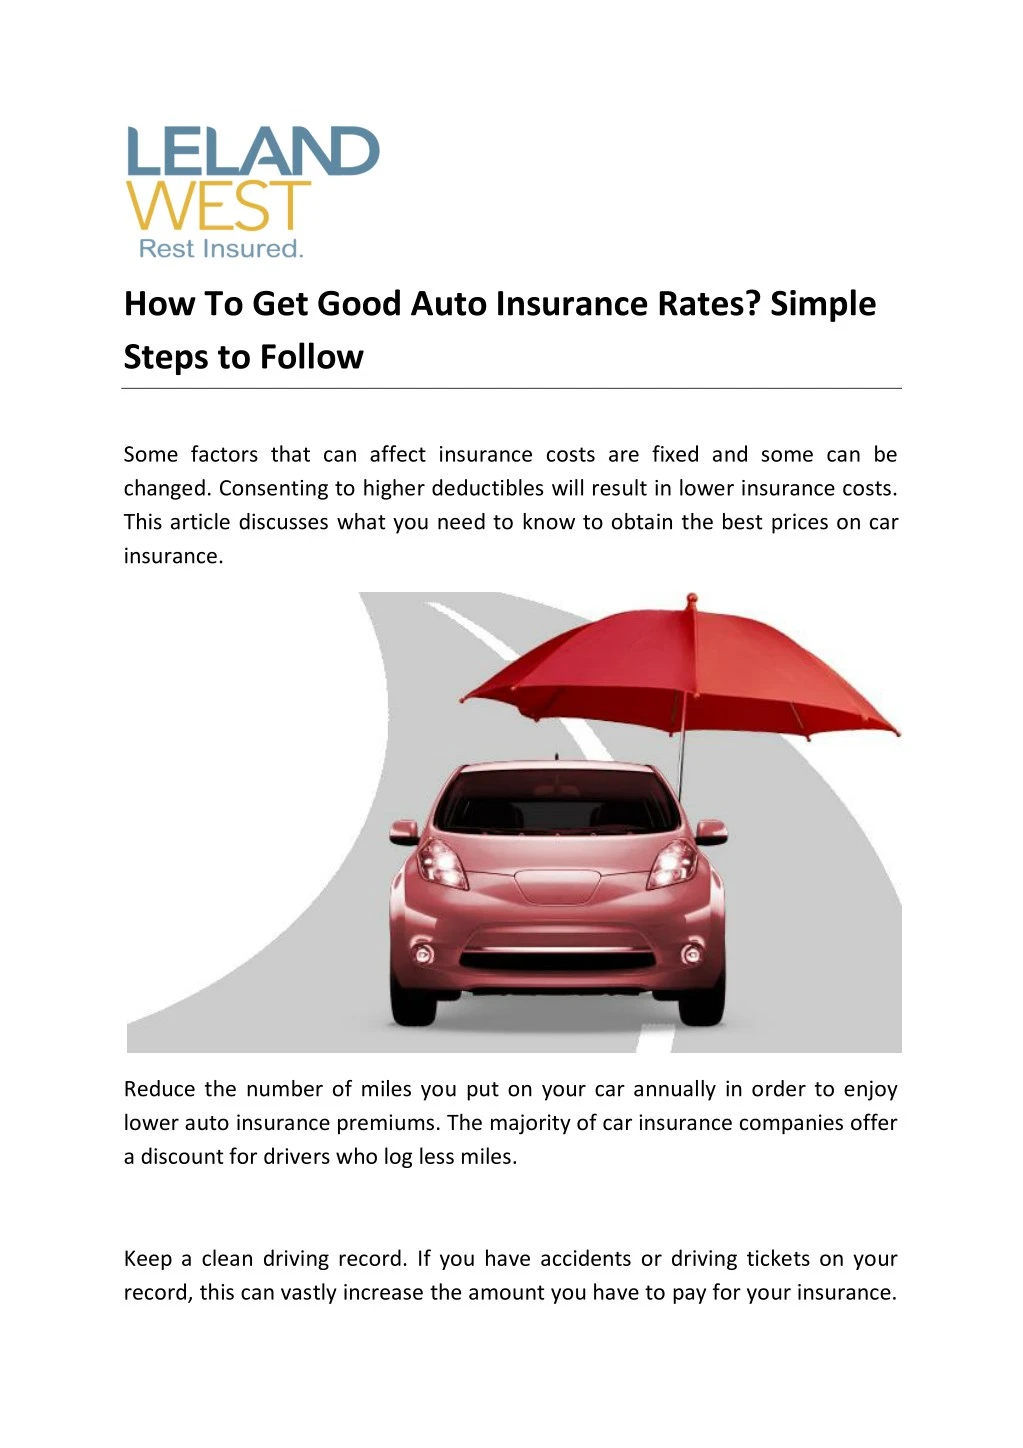 how to get good auto insurance rates simple steps